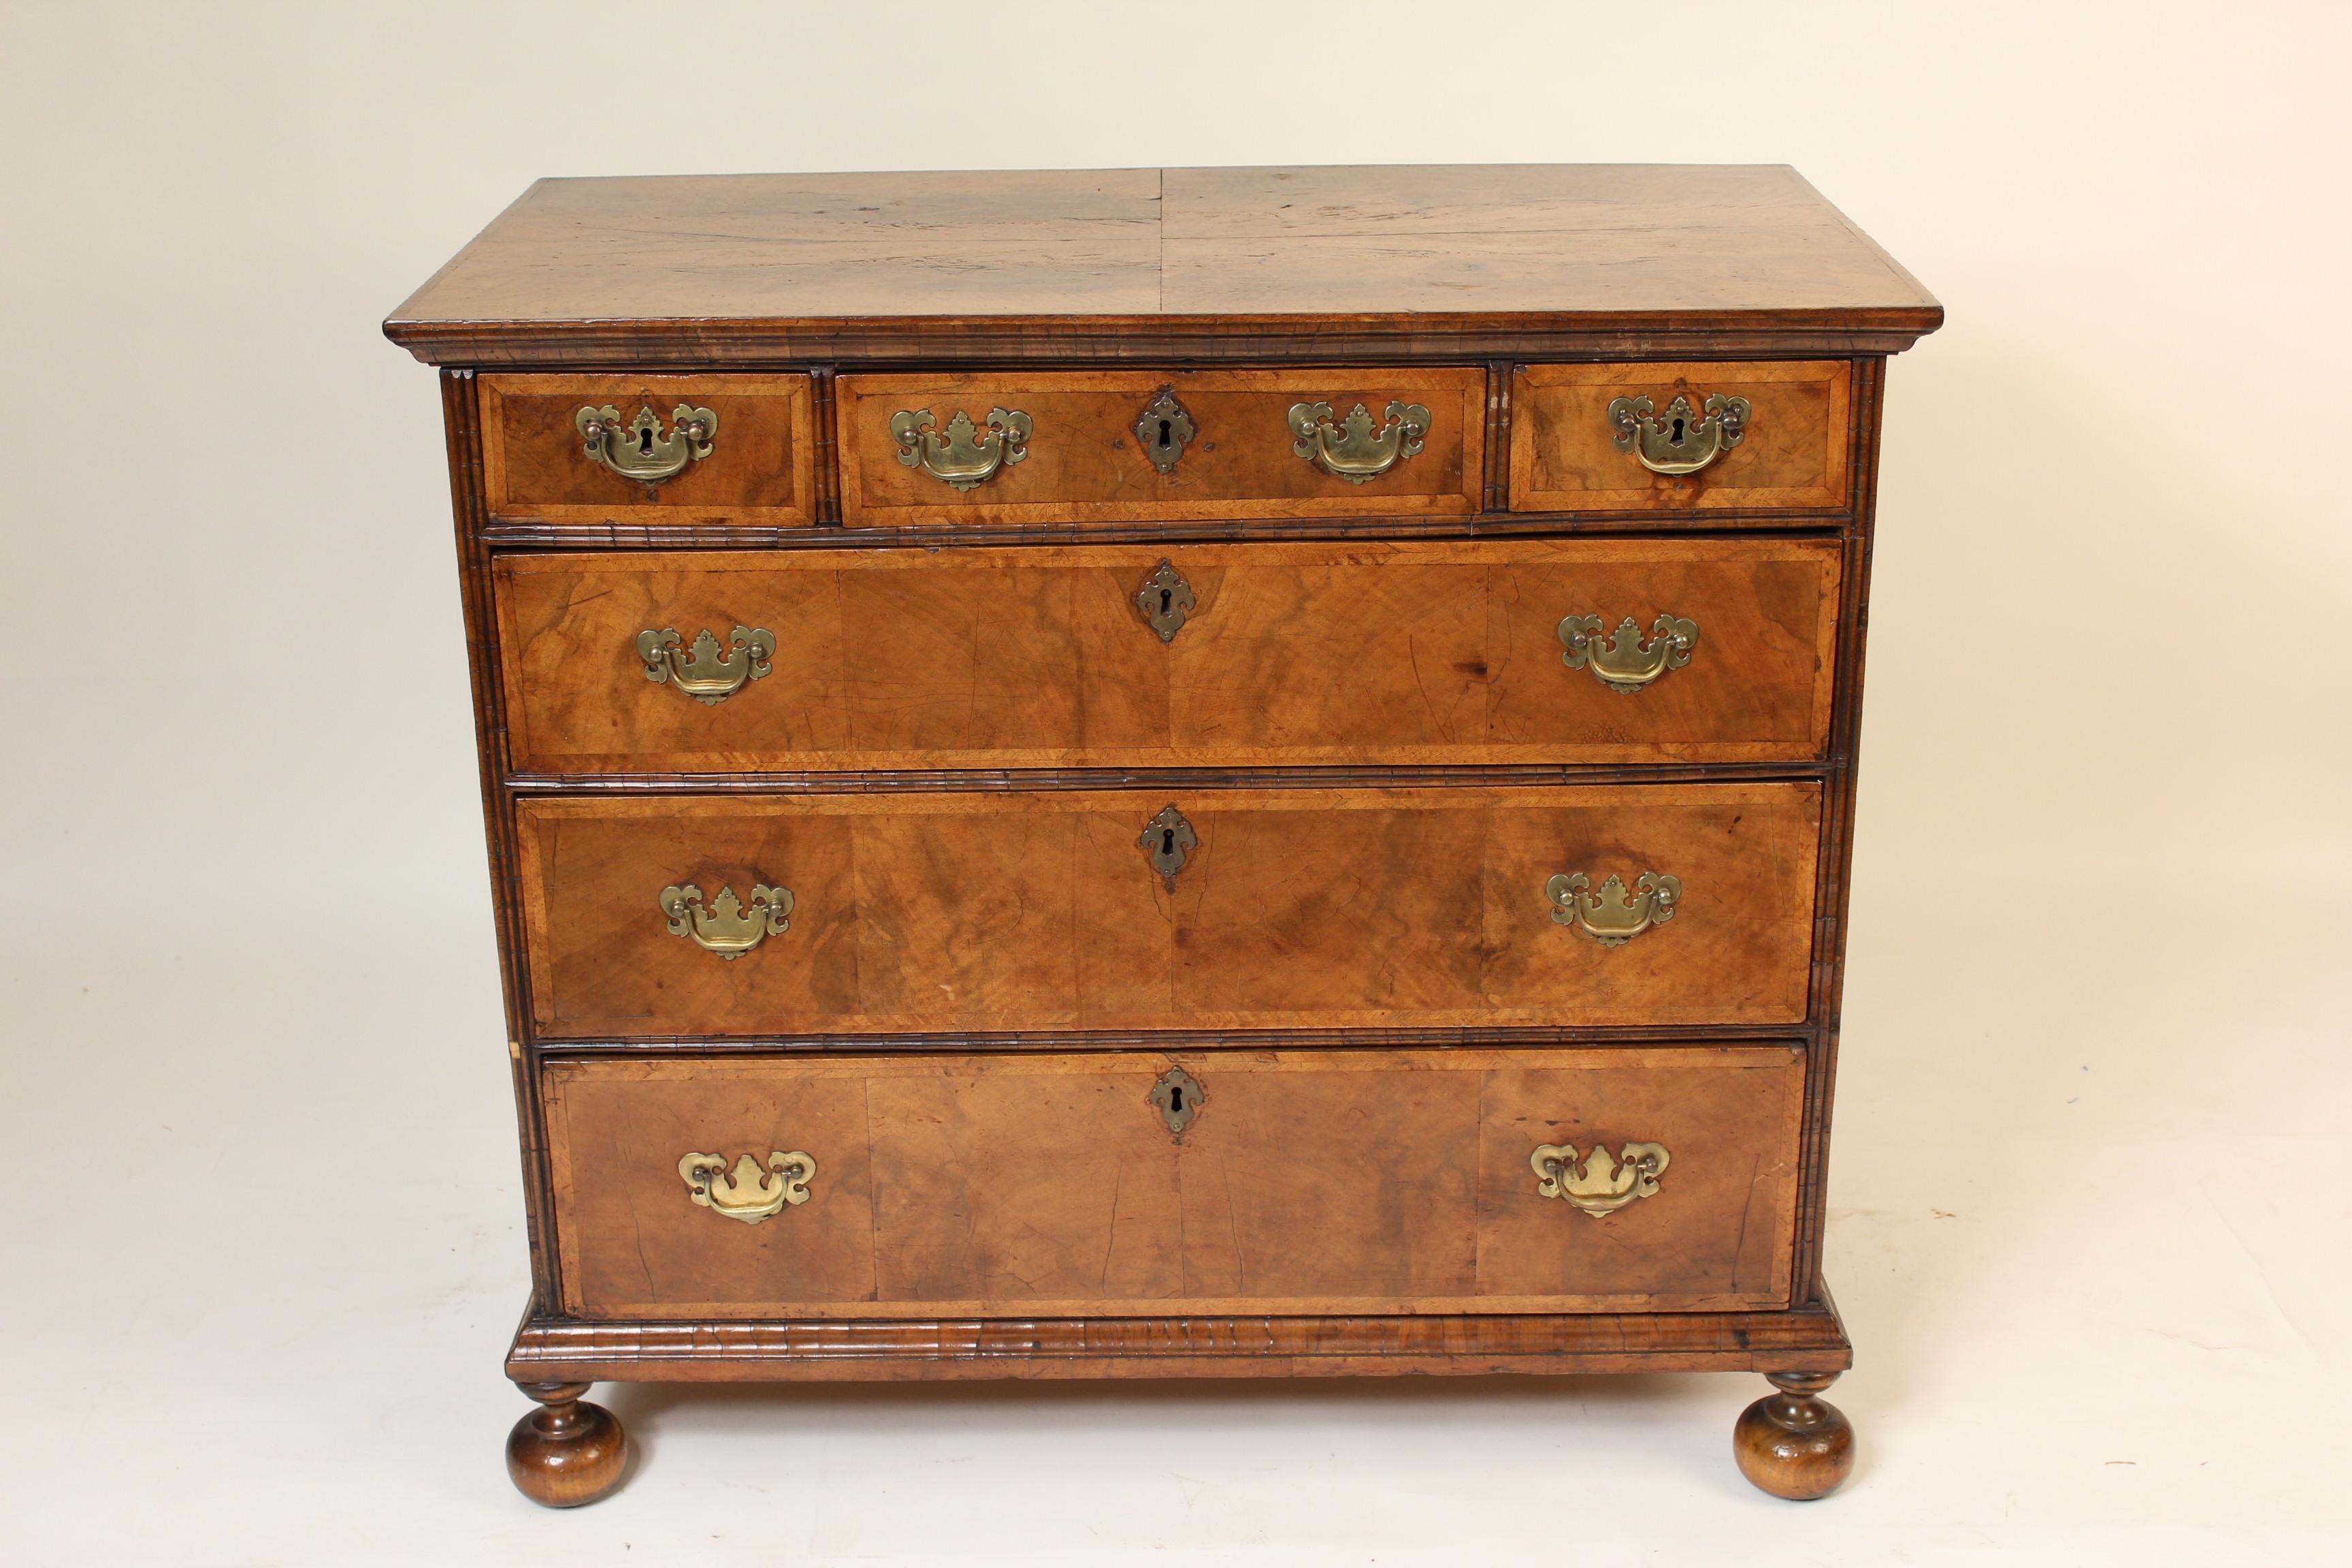 Antique William and Mary style burl walnut chest of drawers with herringbone cross banding around the drawers and top, 19th century.